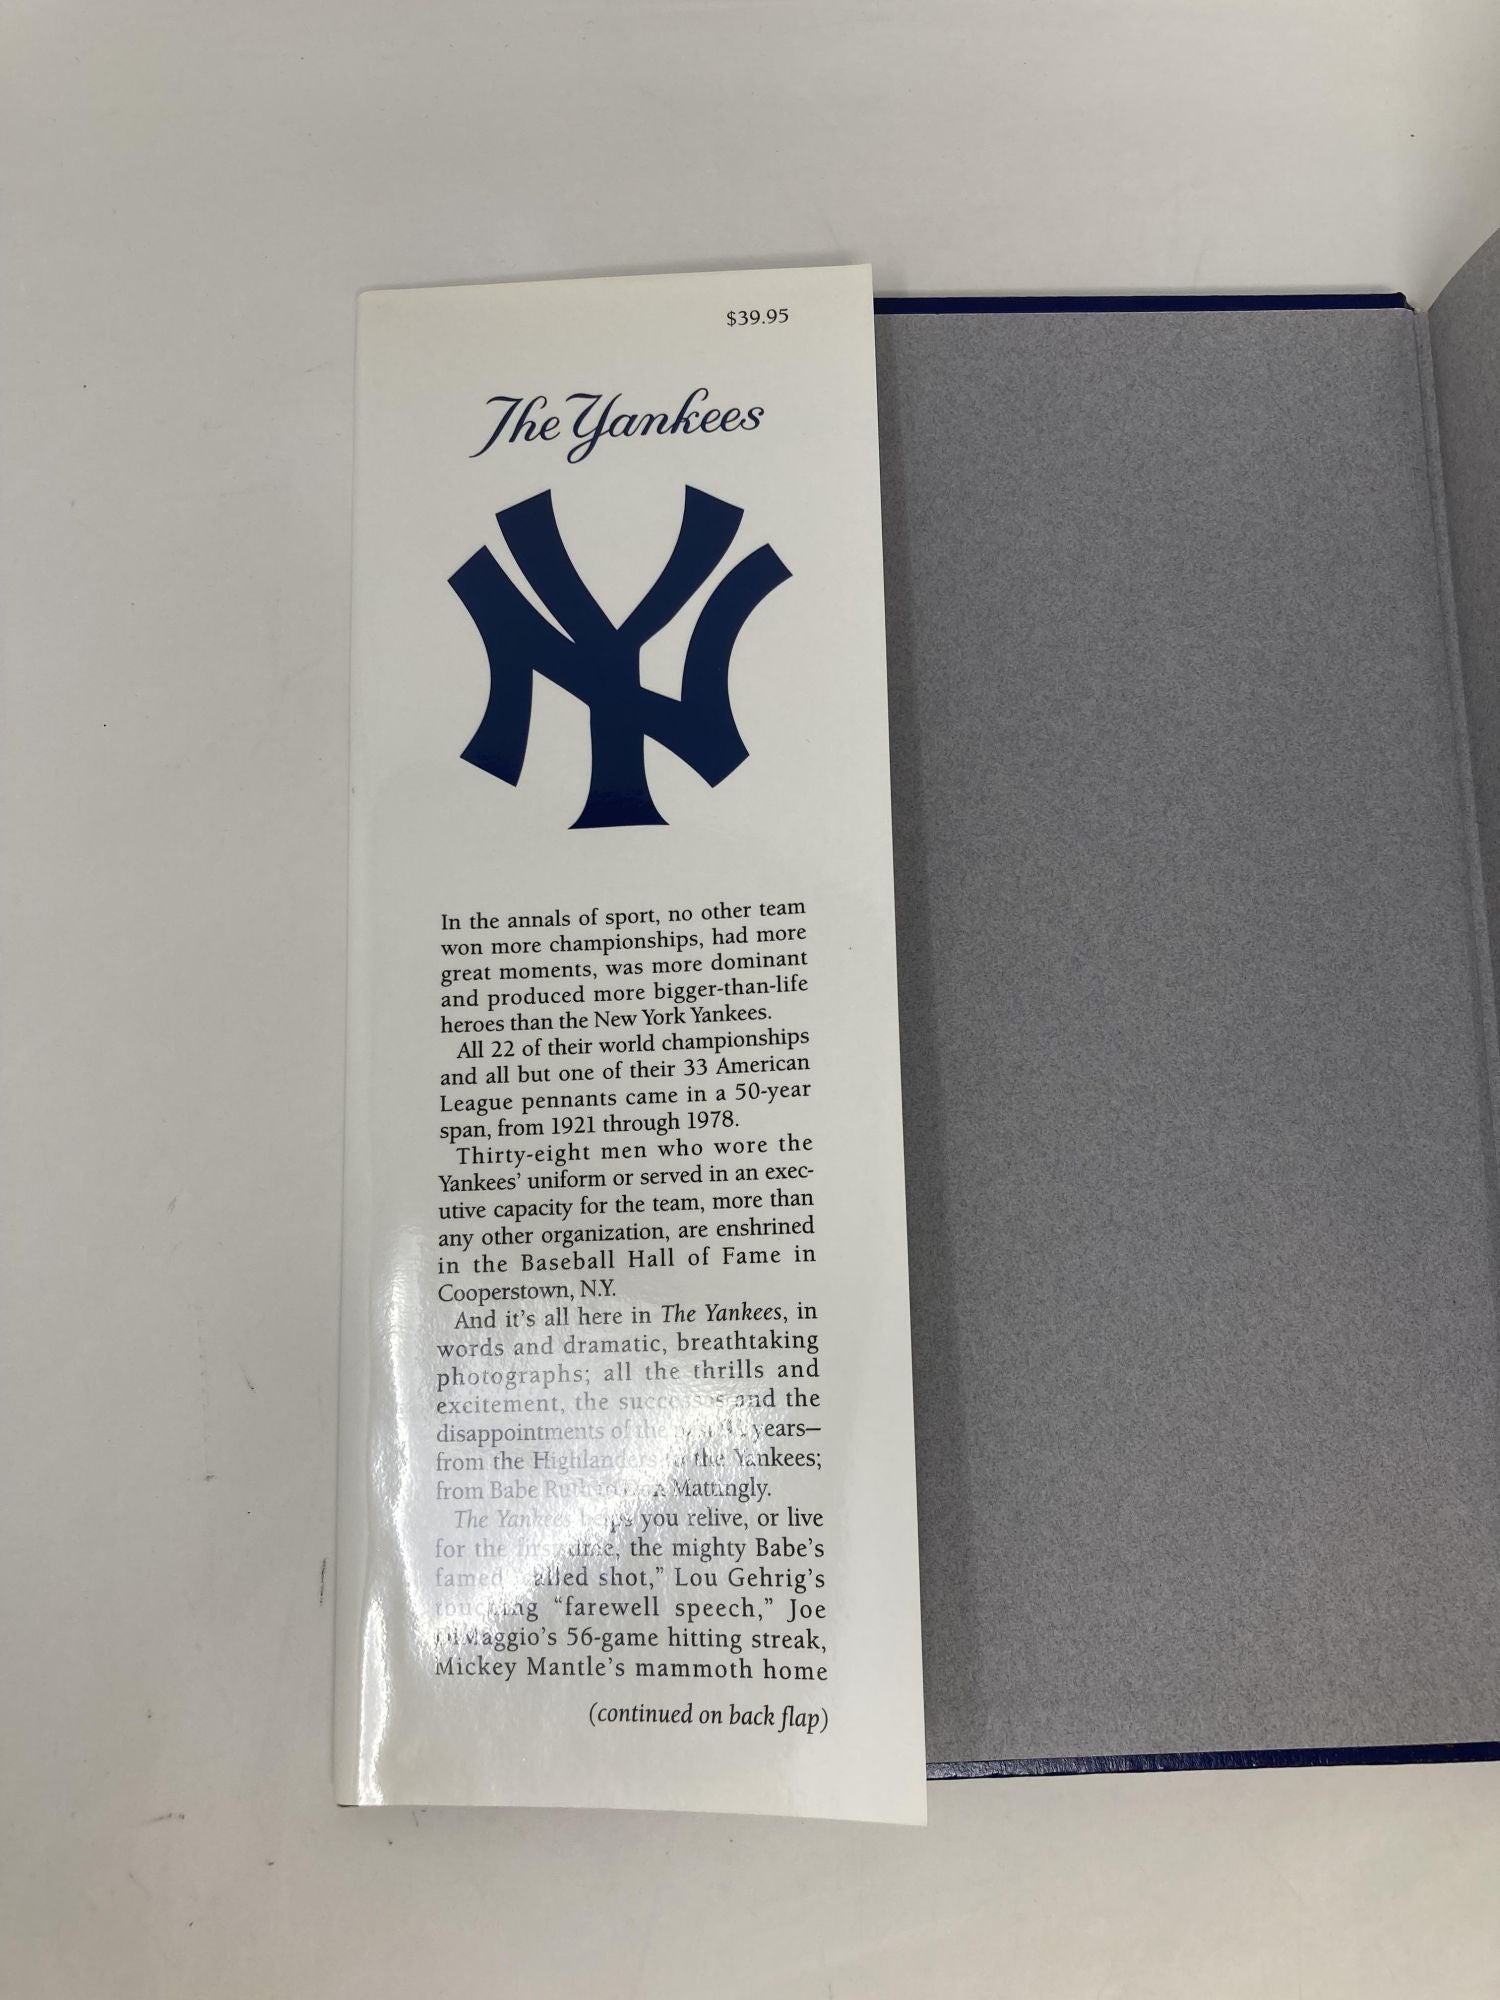  New York Times Story of the Yankees: 1903-Present: 390  Articles, Profiles & Essays eBook : The New York Times, Anderson, Dave,  Baldwin, Alec: Books